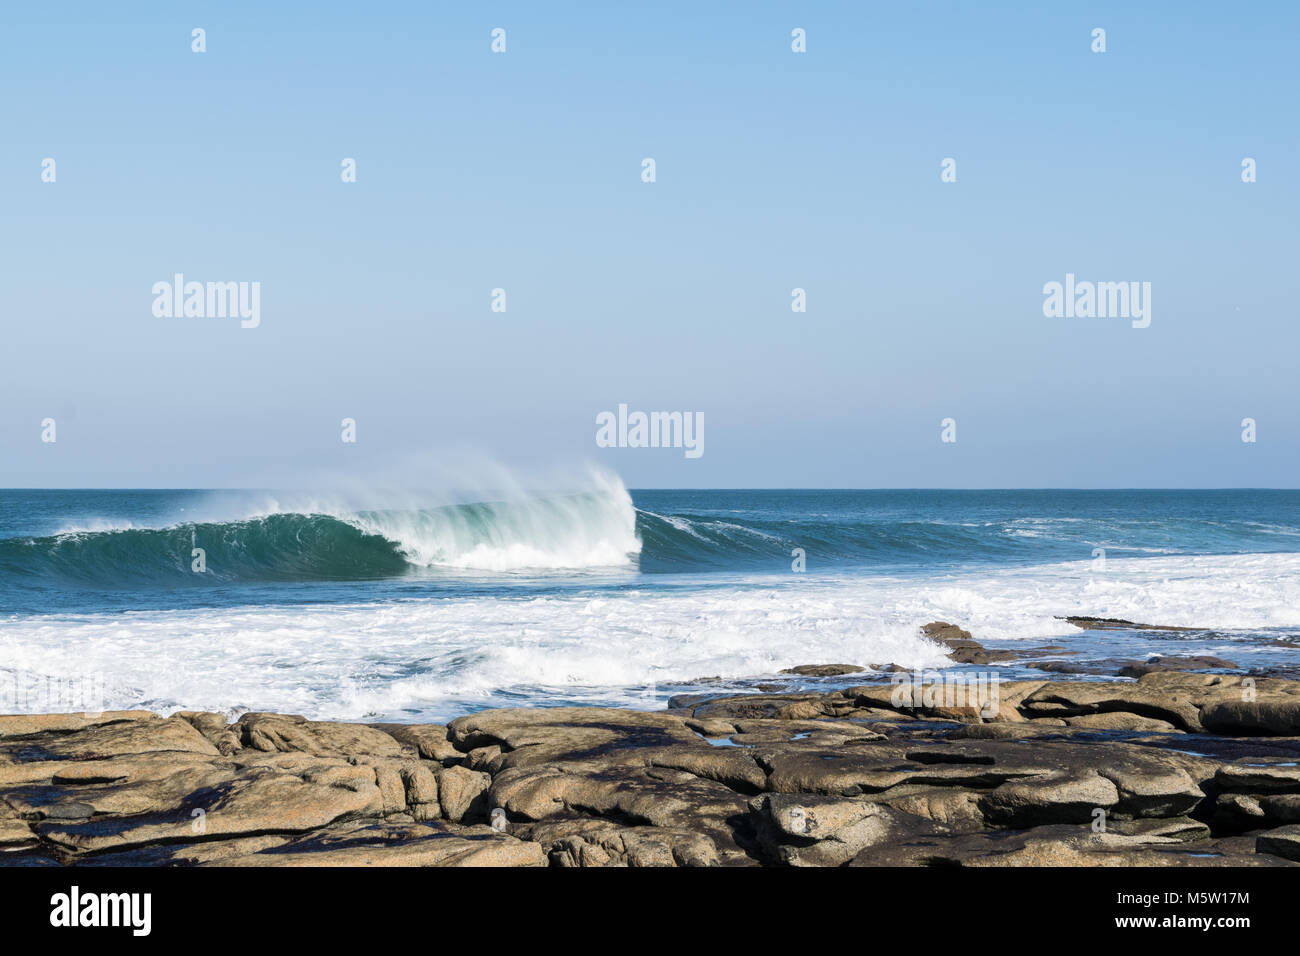 Waves crashing on to a rocky beach on a clear sunny day Stock Photo